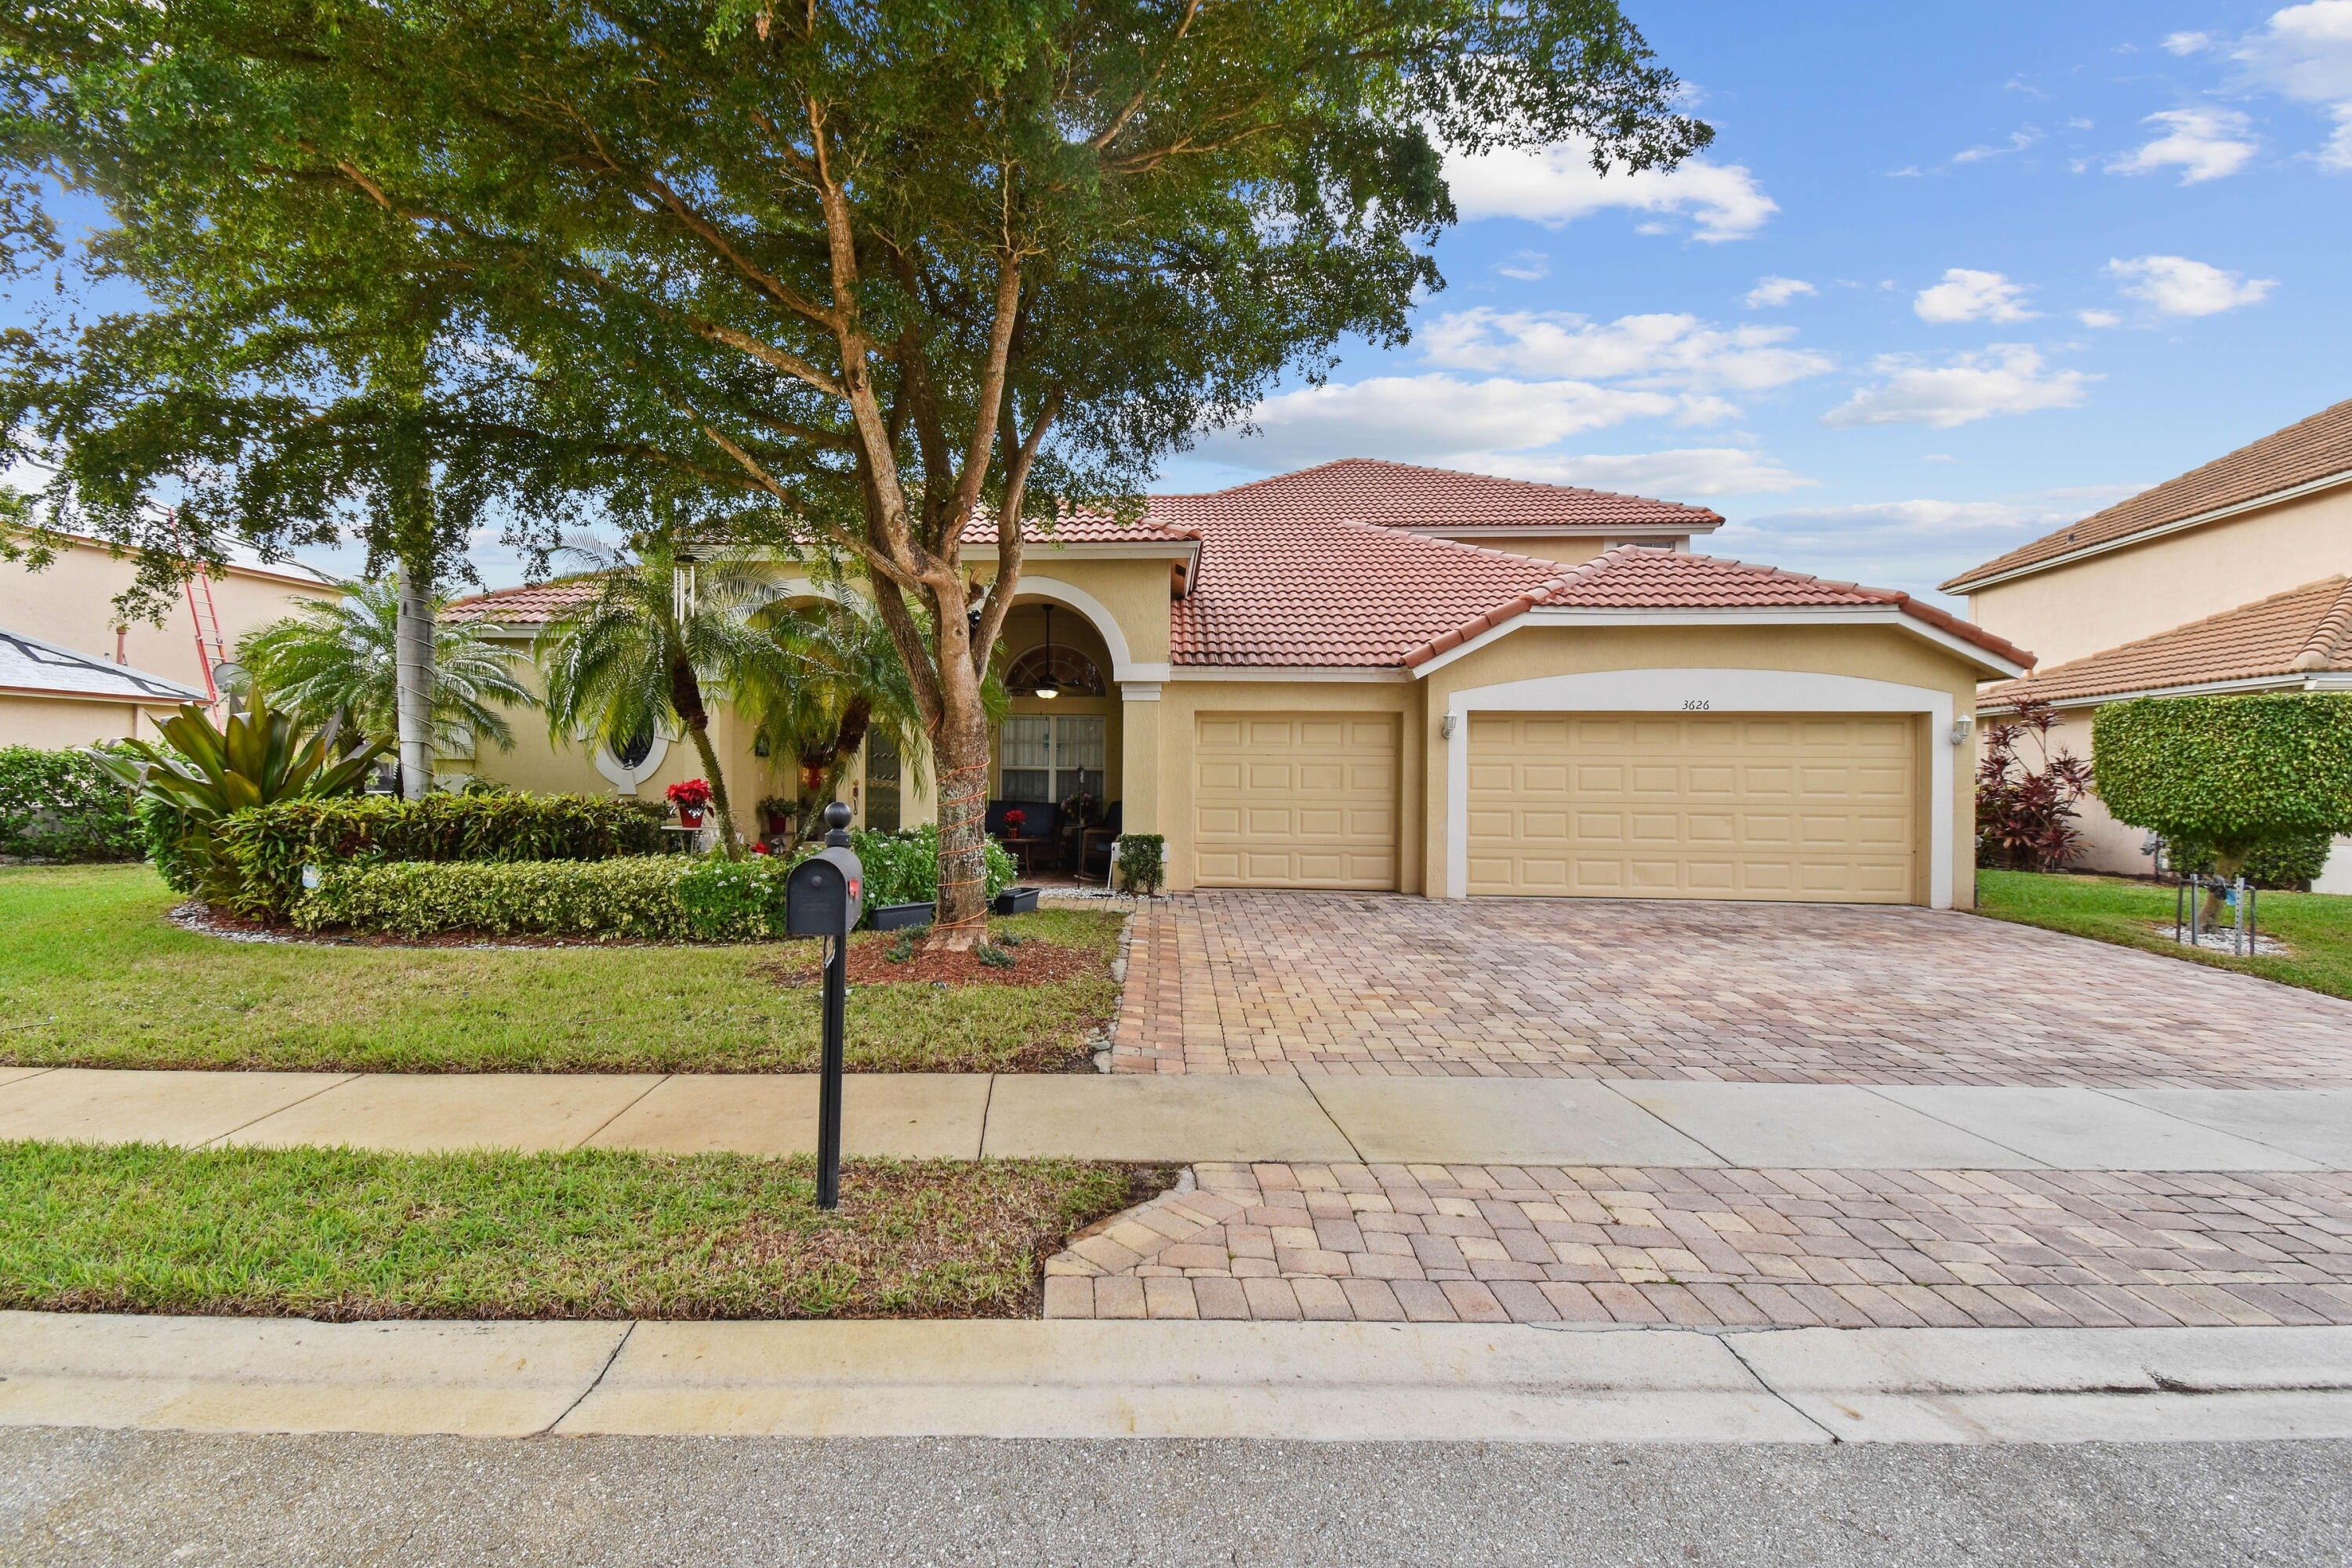 Single Family Home for Sale at Briar Bay, West Palm Beach, FL 33411